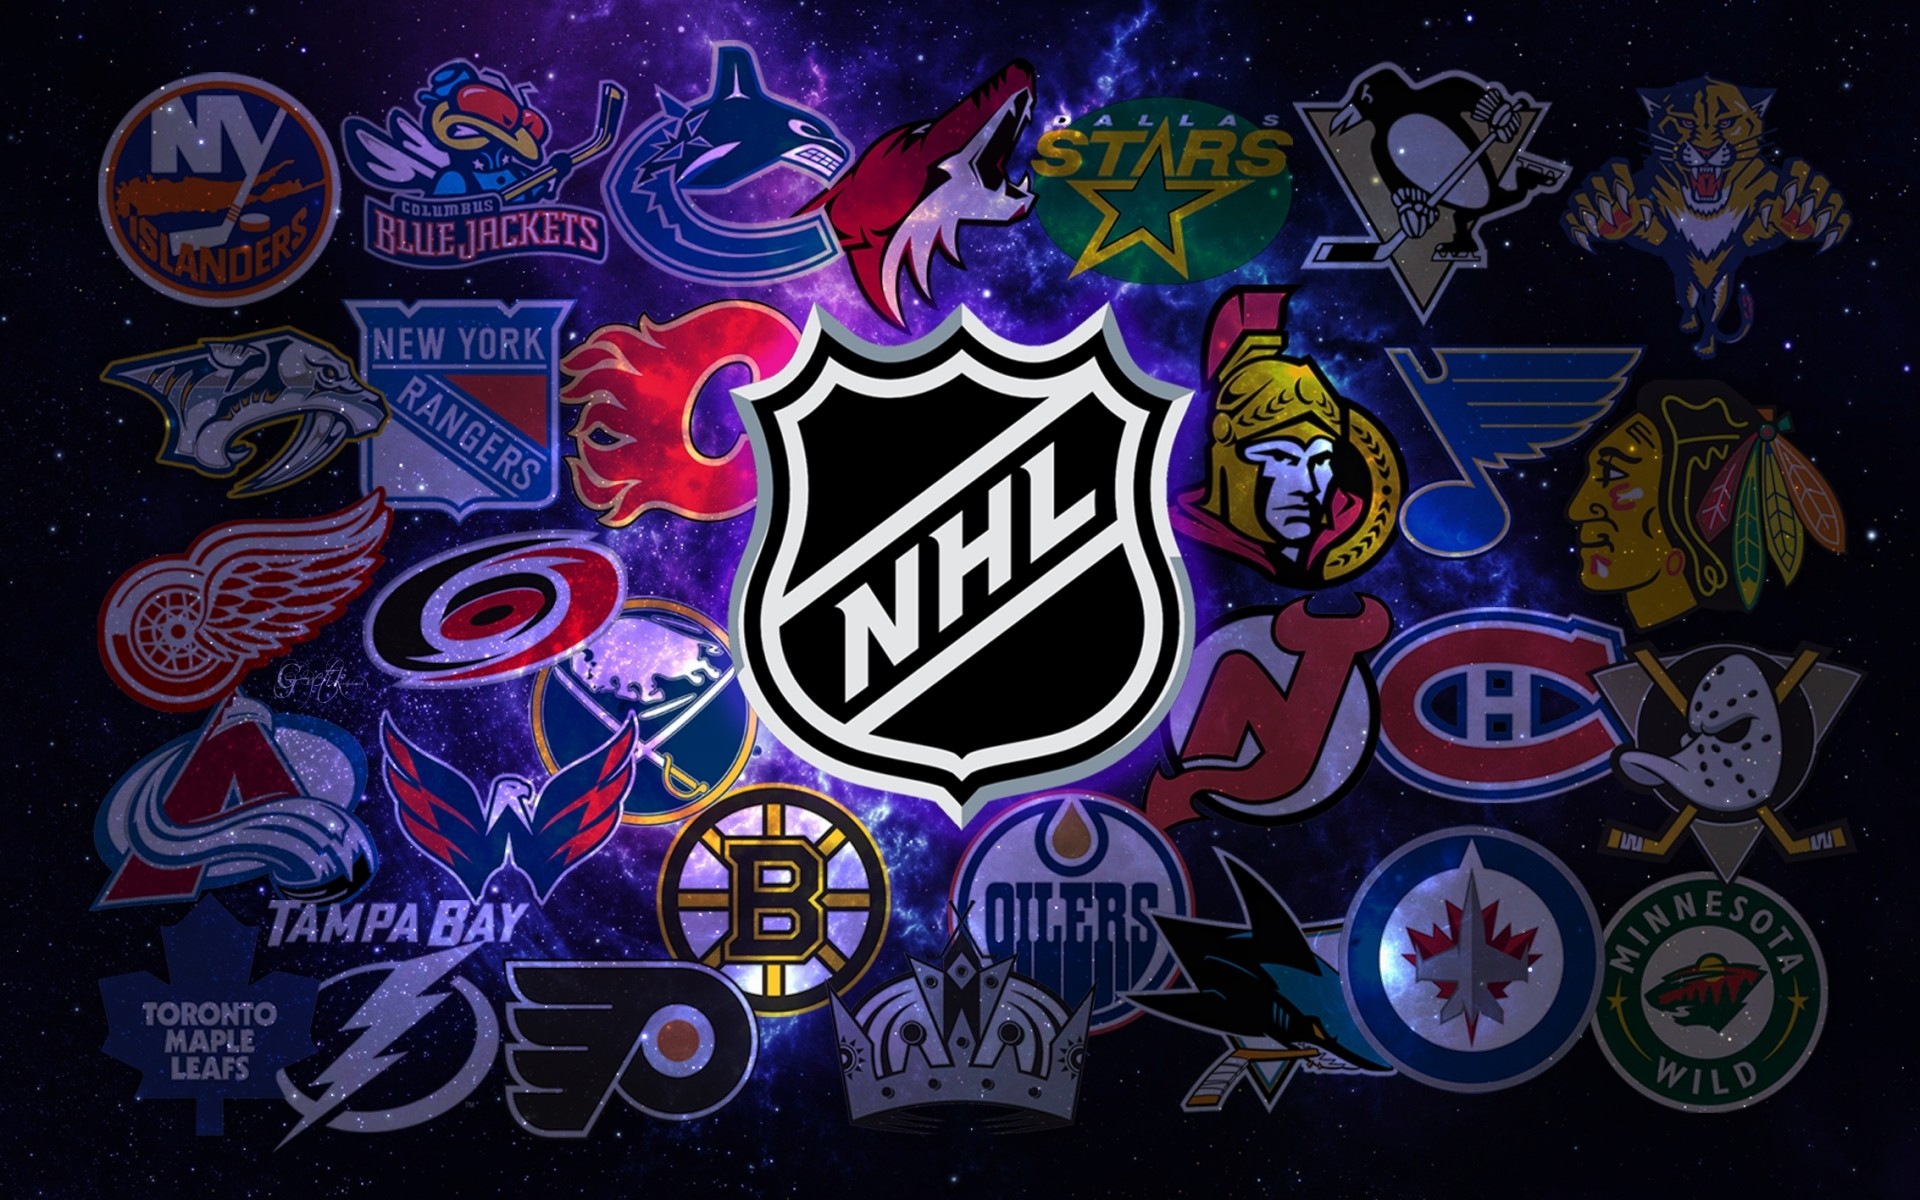 1920x1200 Share This Awesome NHL Hockey Wallpaper On Facebook 